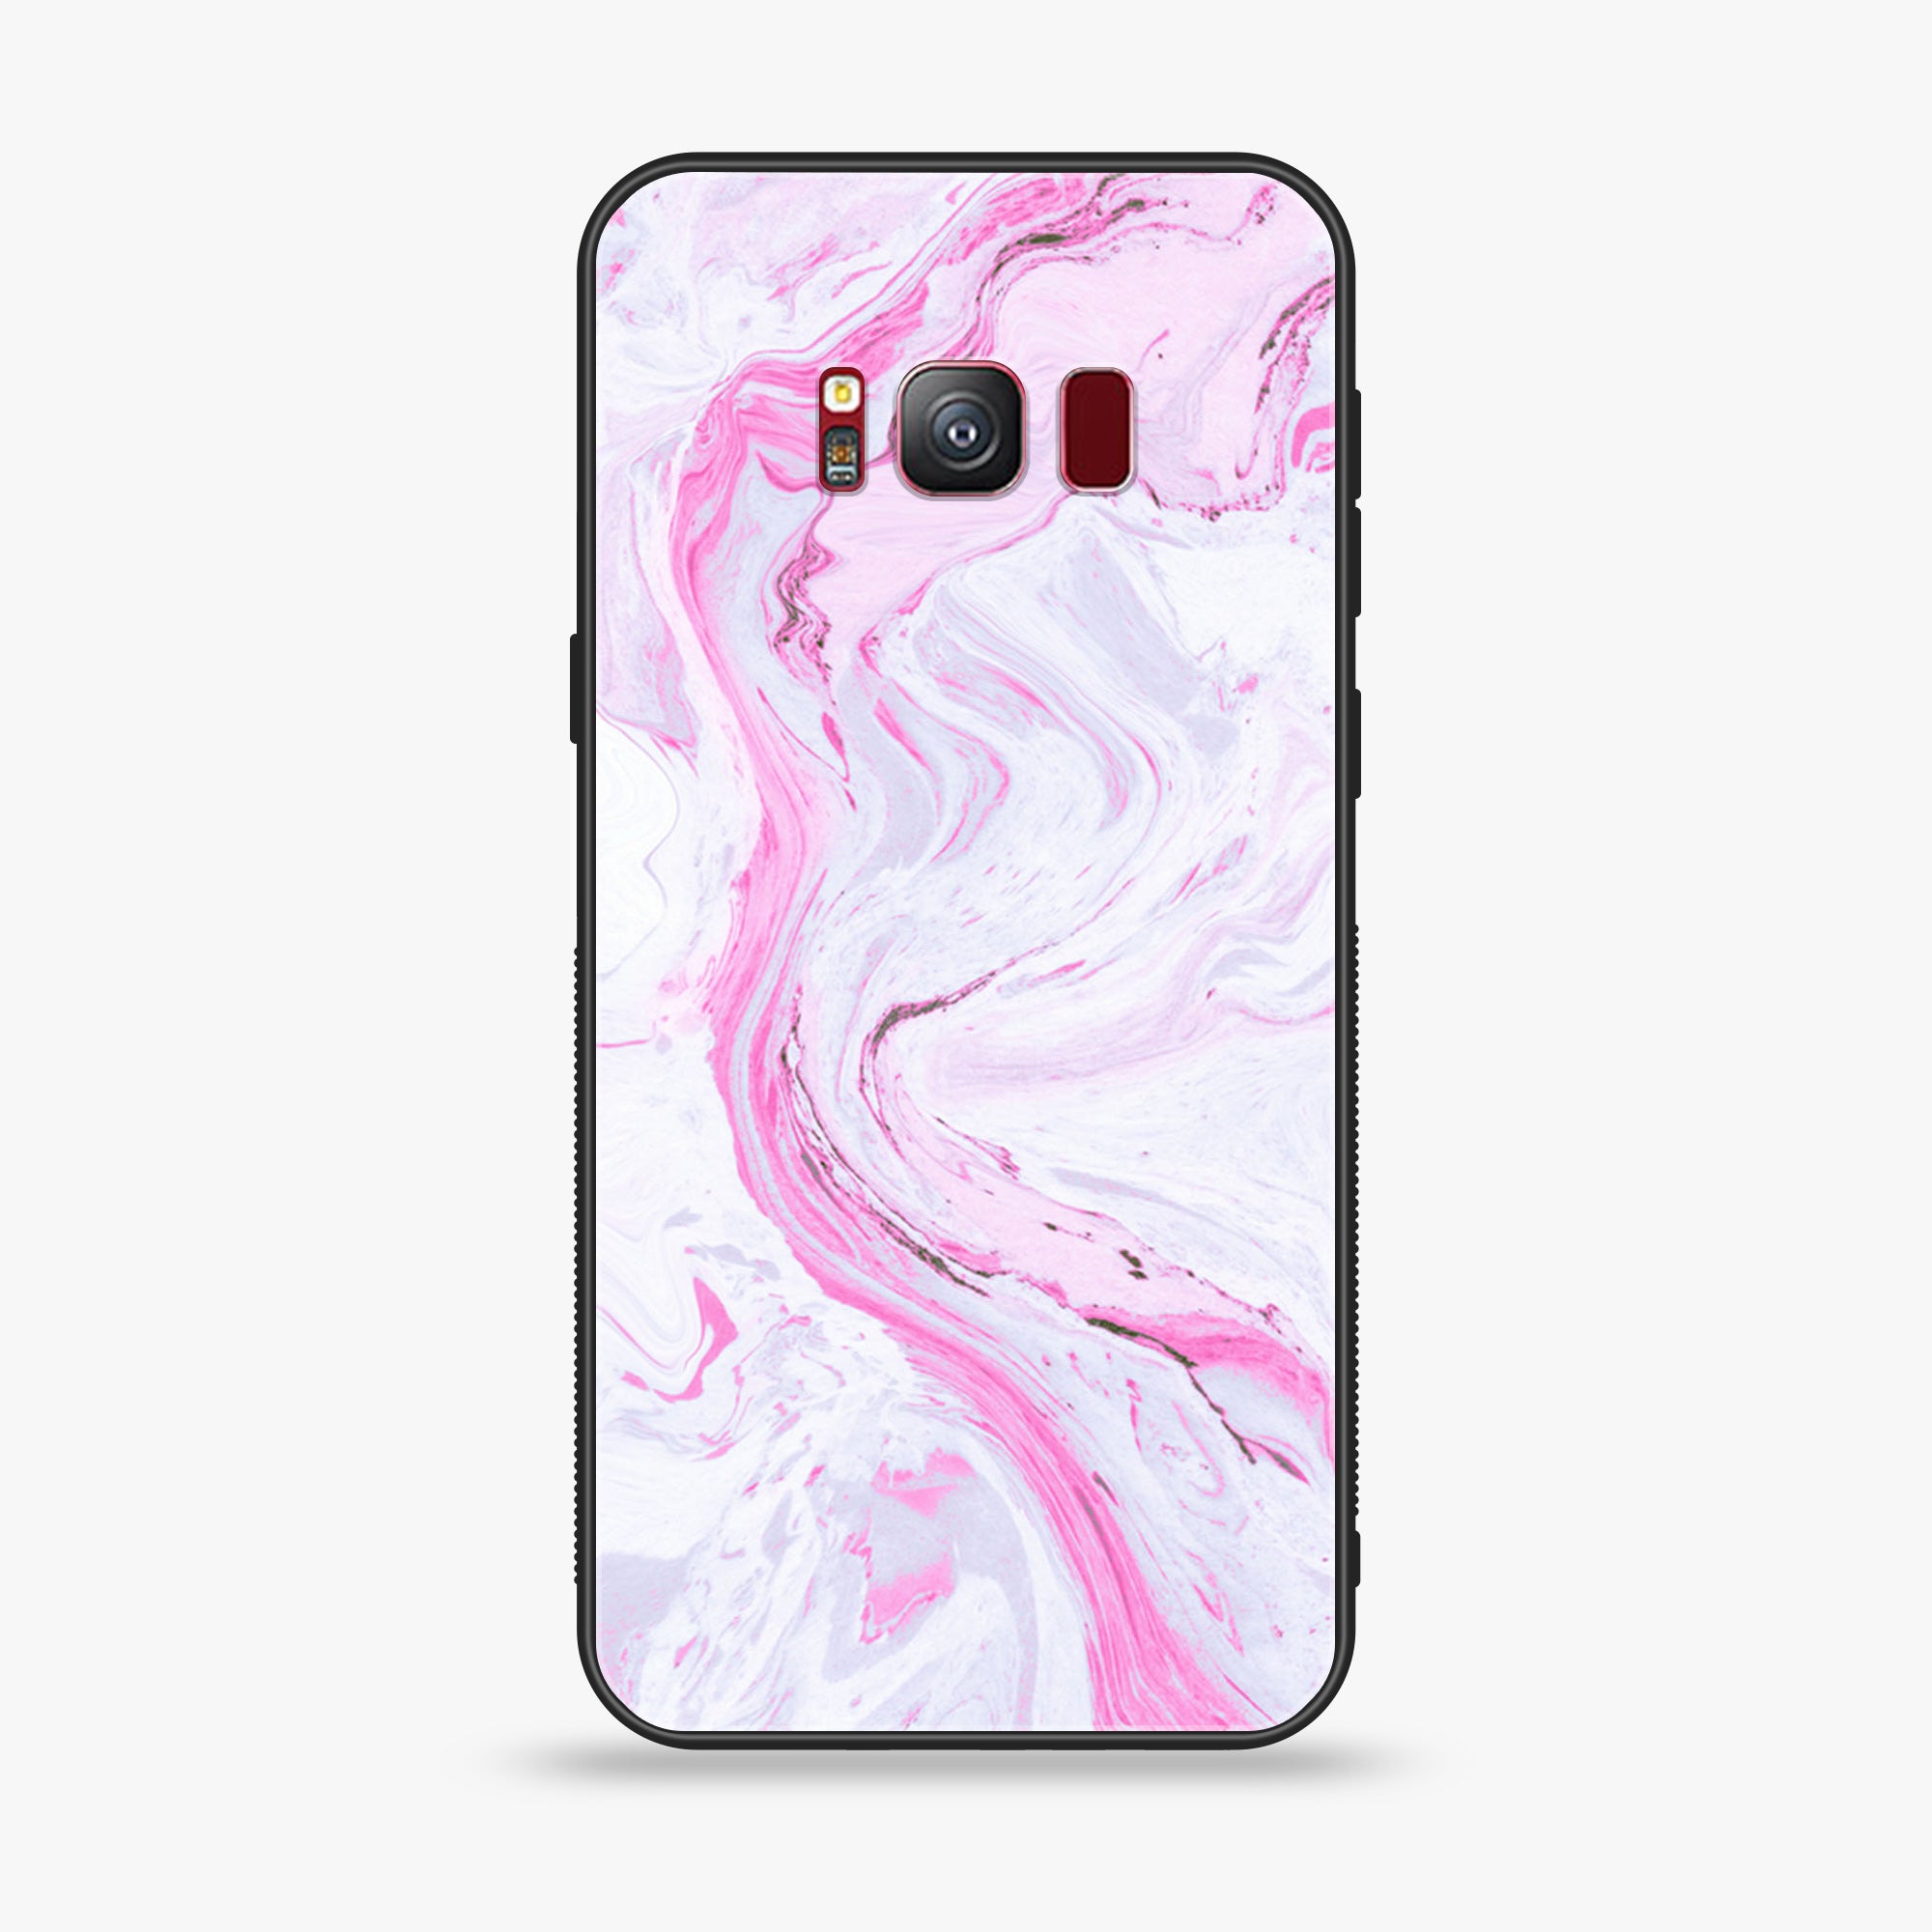 Galaxy S8 Plus - Pink Marble Series - Premium Printed Glass soft Bumper shock Proof Case